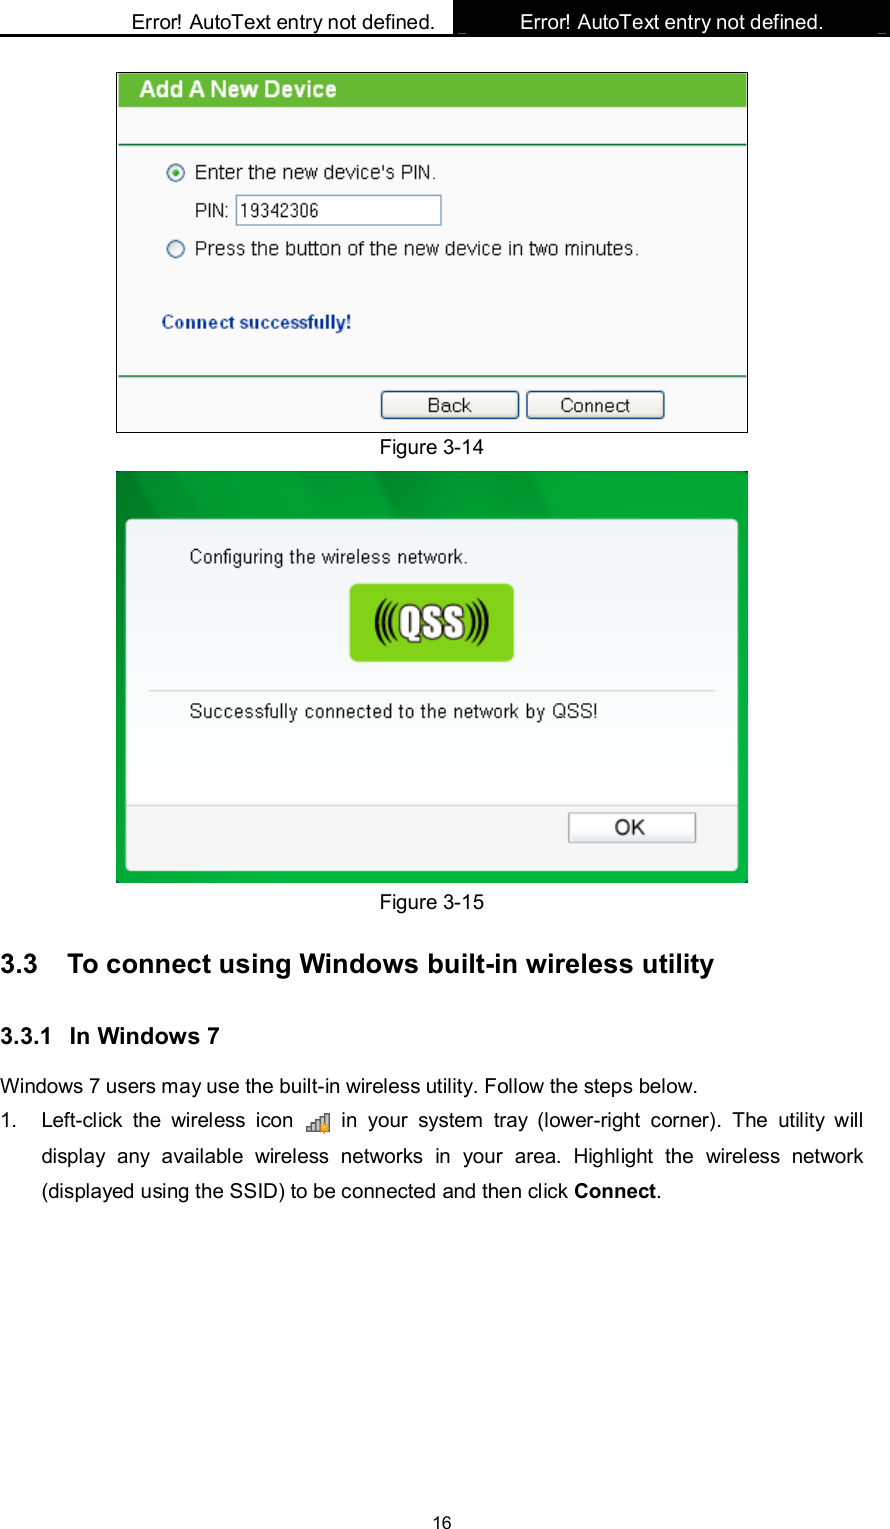    Error! AutoText entry not defined. Error! AutoText entry not defined.    16  Figure 3-14  Figure 3-15 3.3  To connect using Windows built-in wireless utility 3.3.1  In Windows 7 Windows 7 users may use the built-in wireless utility. Follow the steps below. 1.  Left-click  the  wireless  icon    in  your  system  tray  (lower-right  corner).  The  utility  will display  any  available  wireless  networks  in  your  area.  Highlight  the  wireless  network (displayed using the SSID) to be connected and then click Connect.   